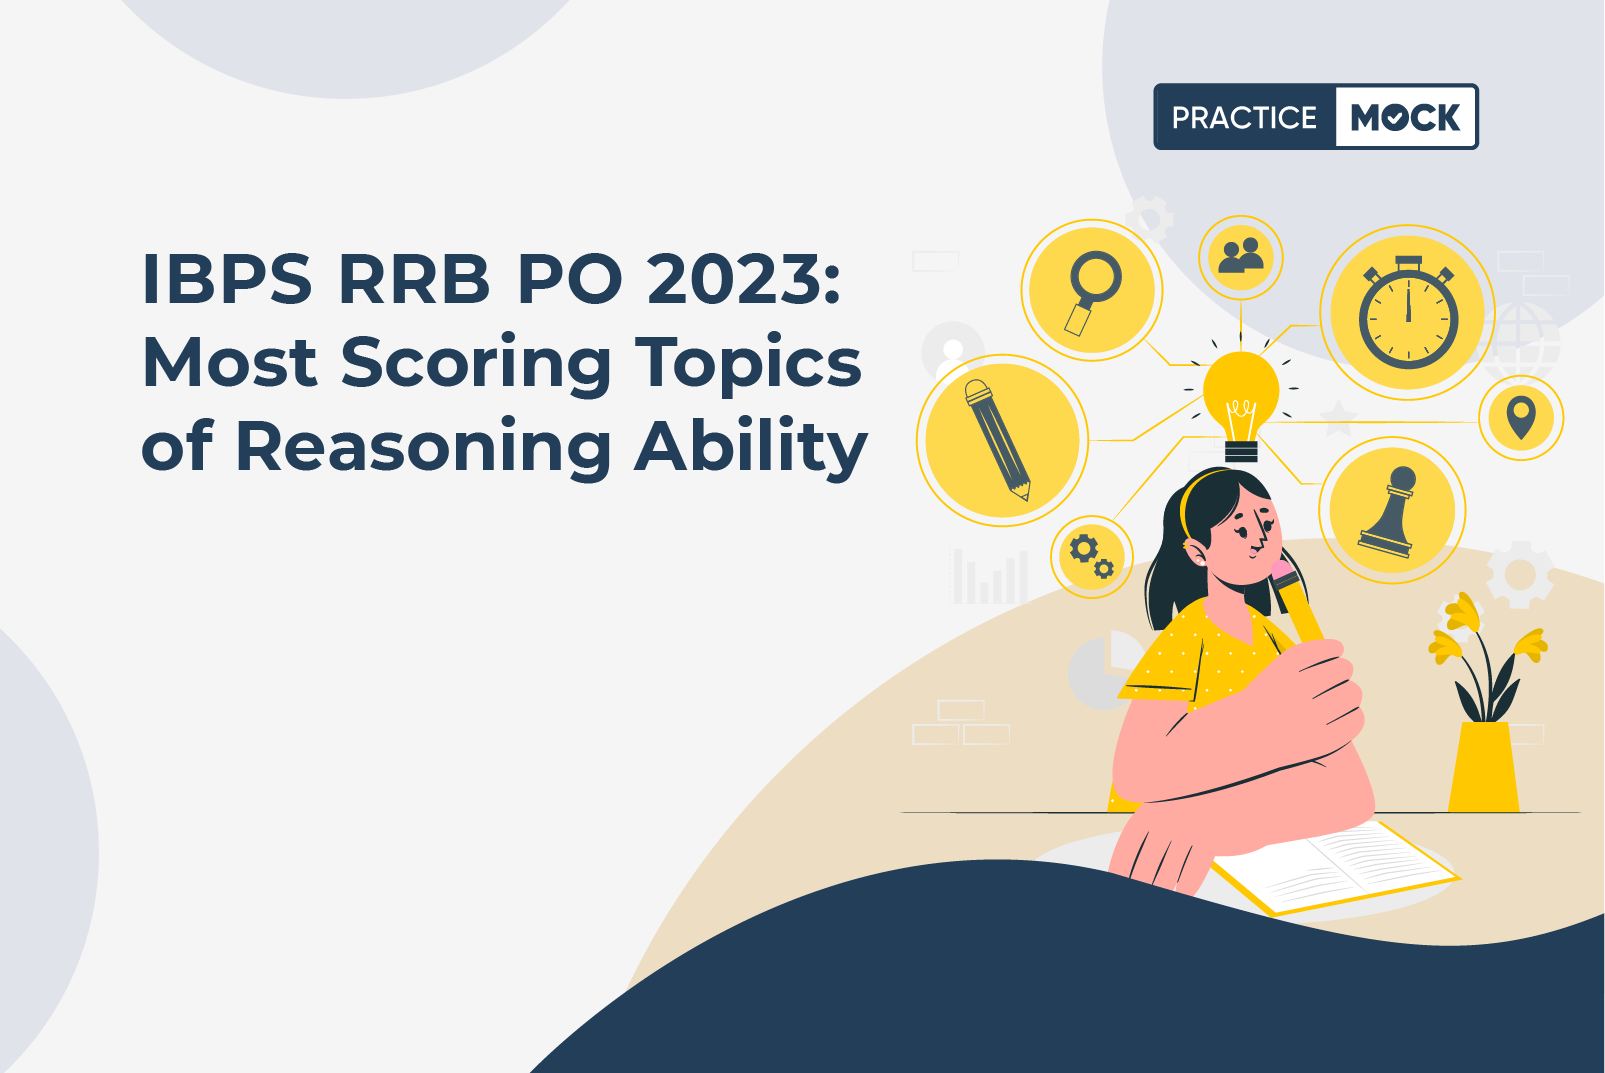 RRB PO 2023 Most Scoring Topics of Reasoning Ability